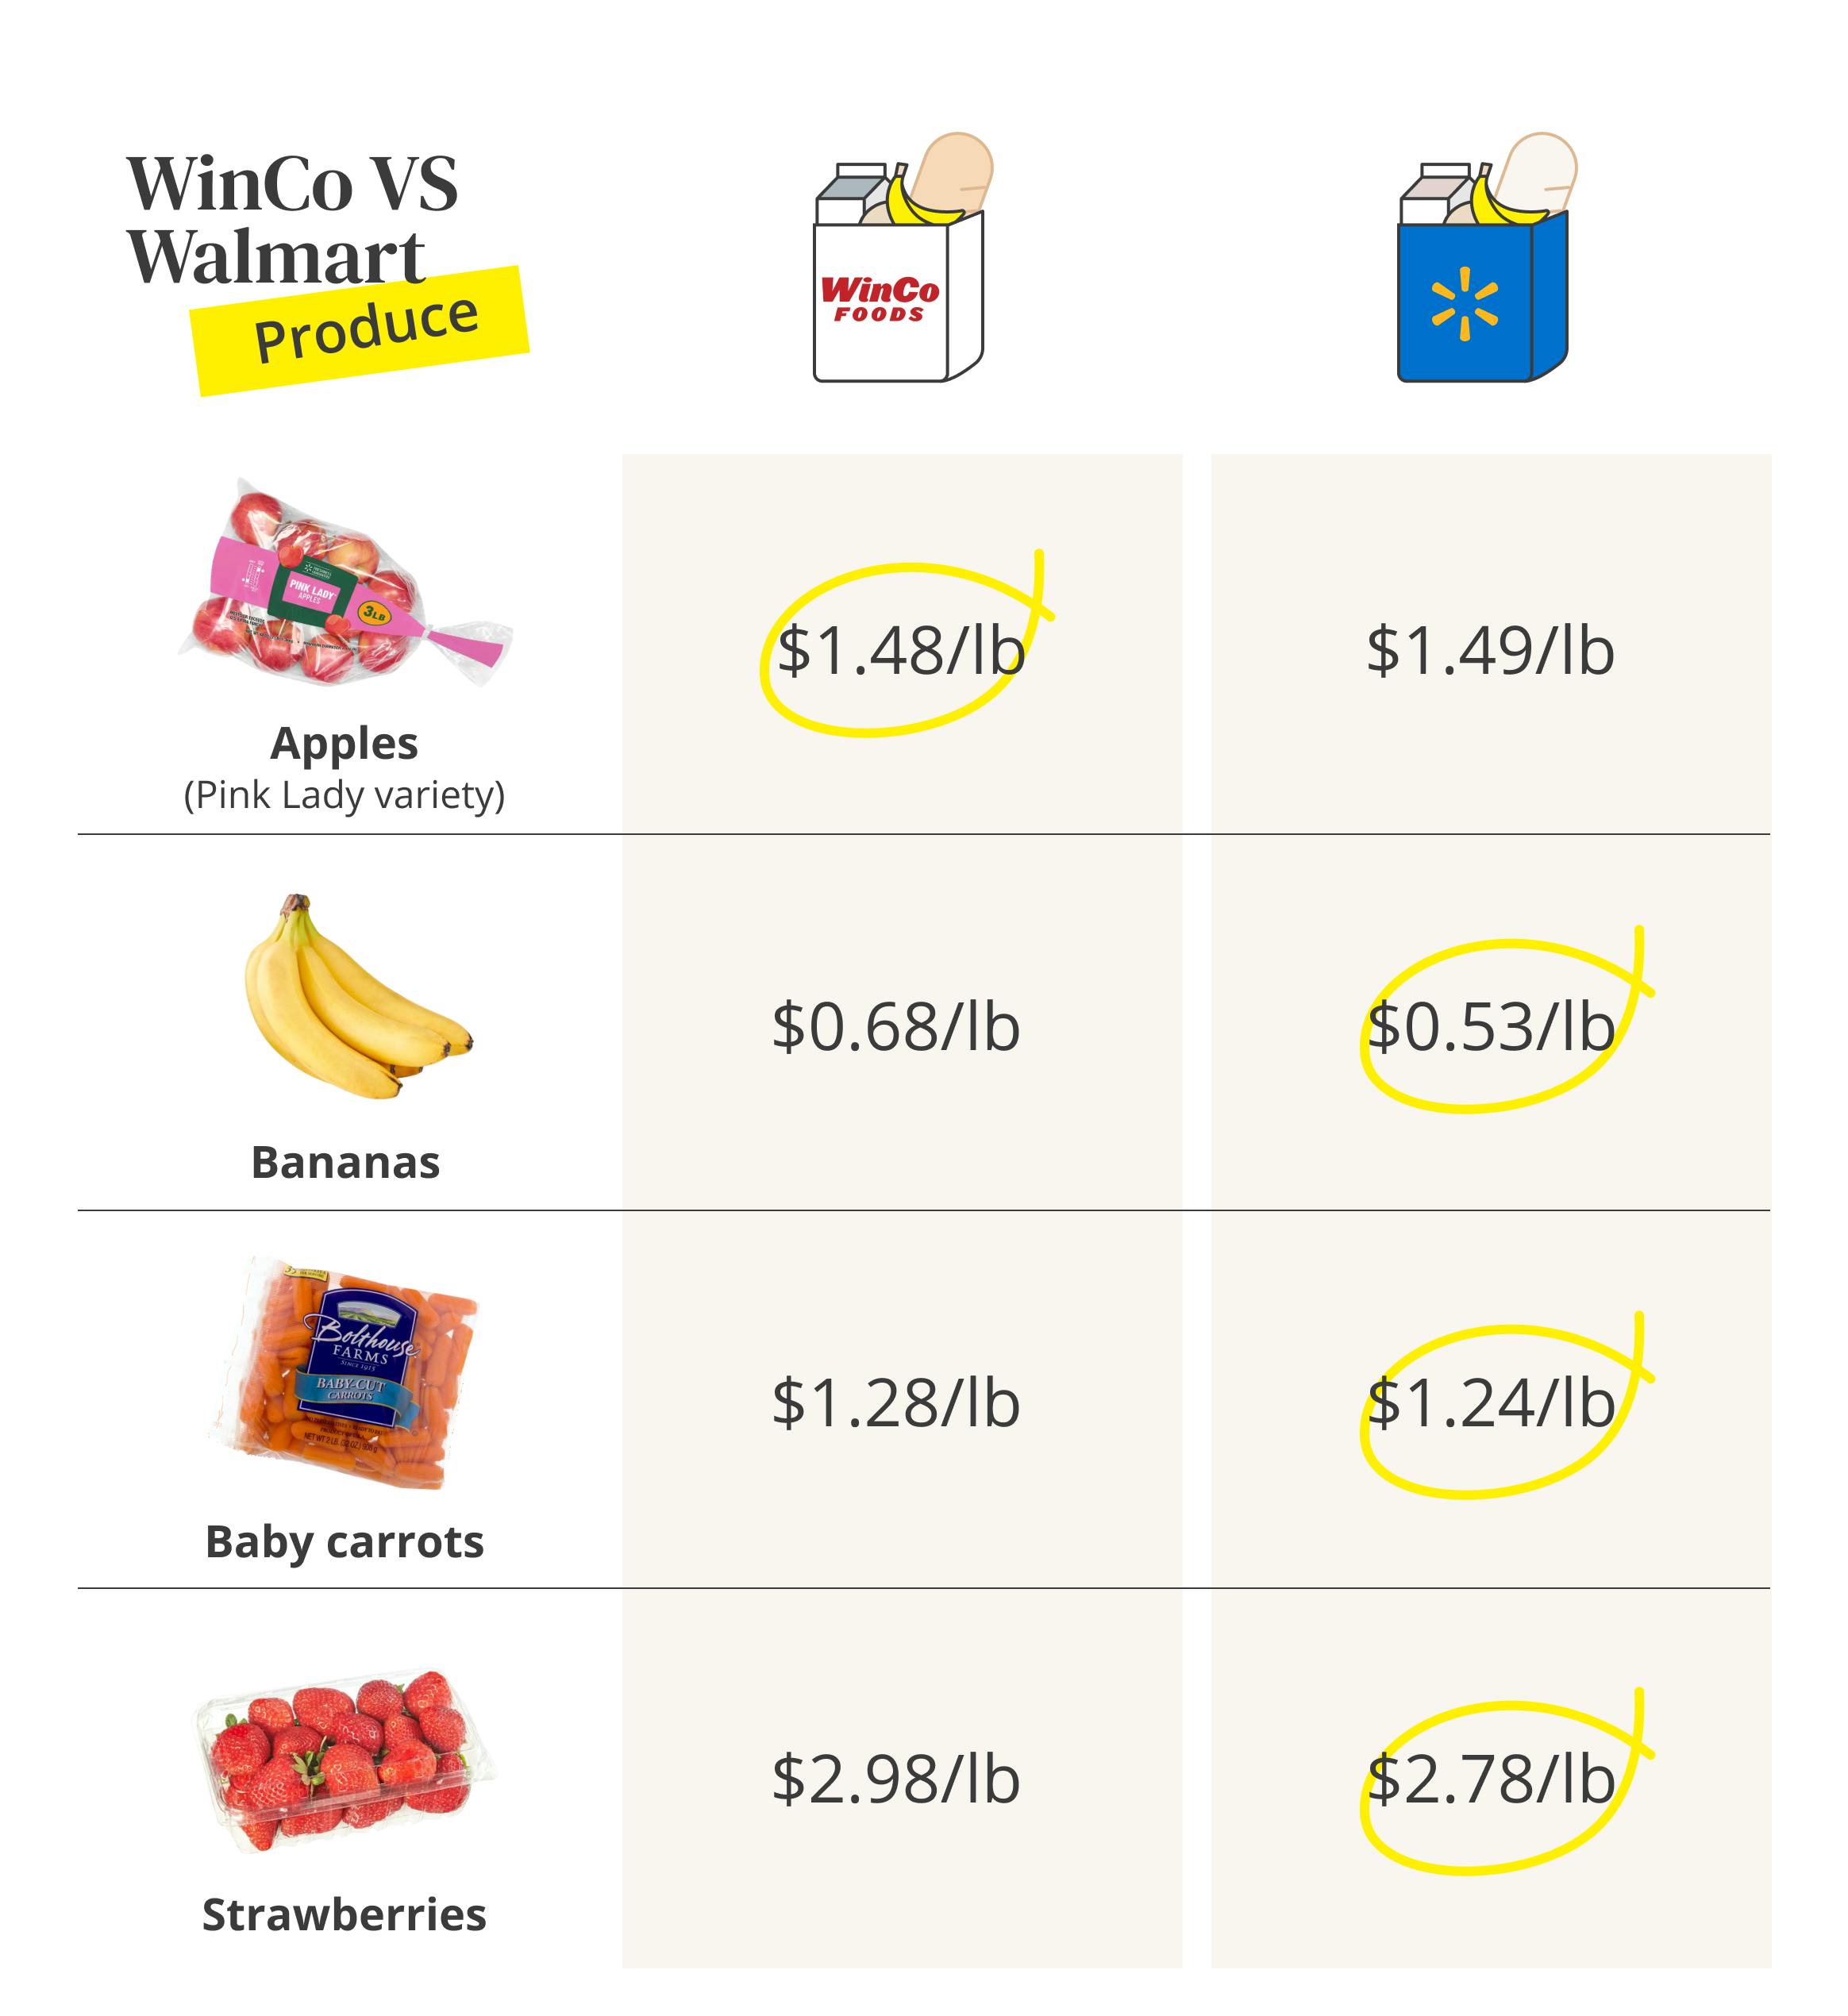 How WinCo prices compare to Walmart prices for produce.